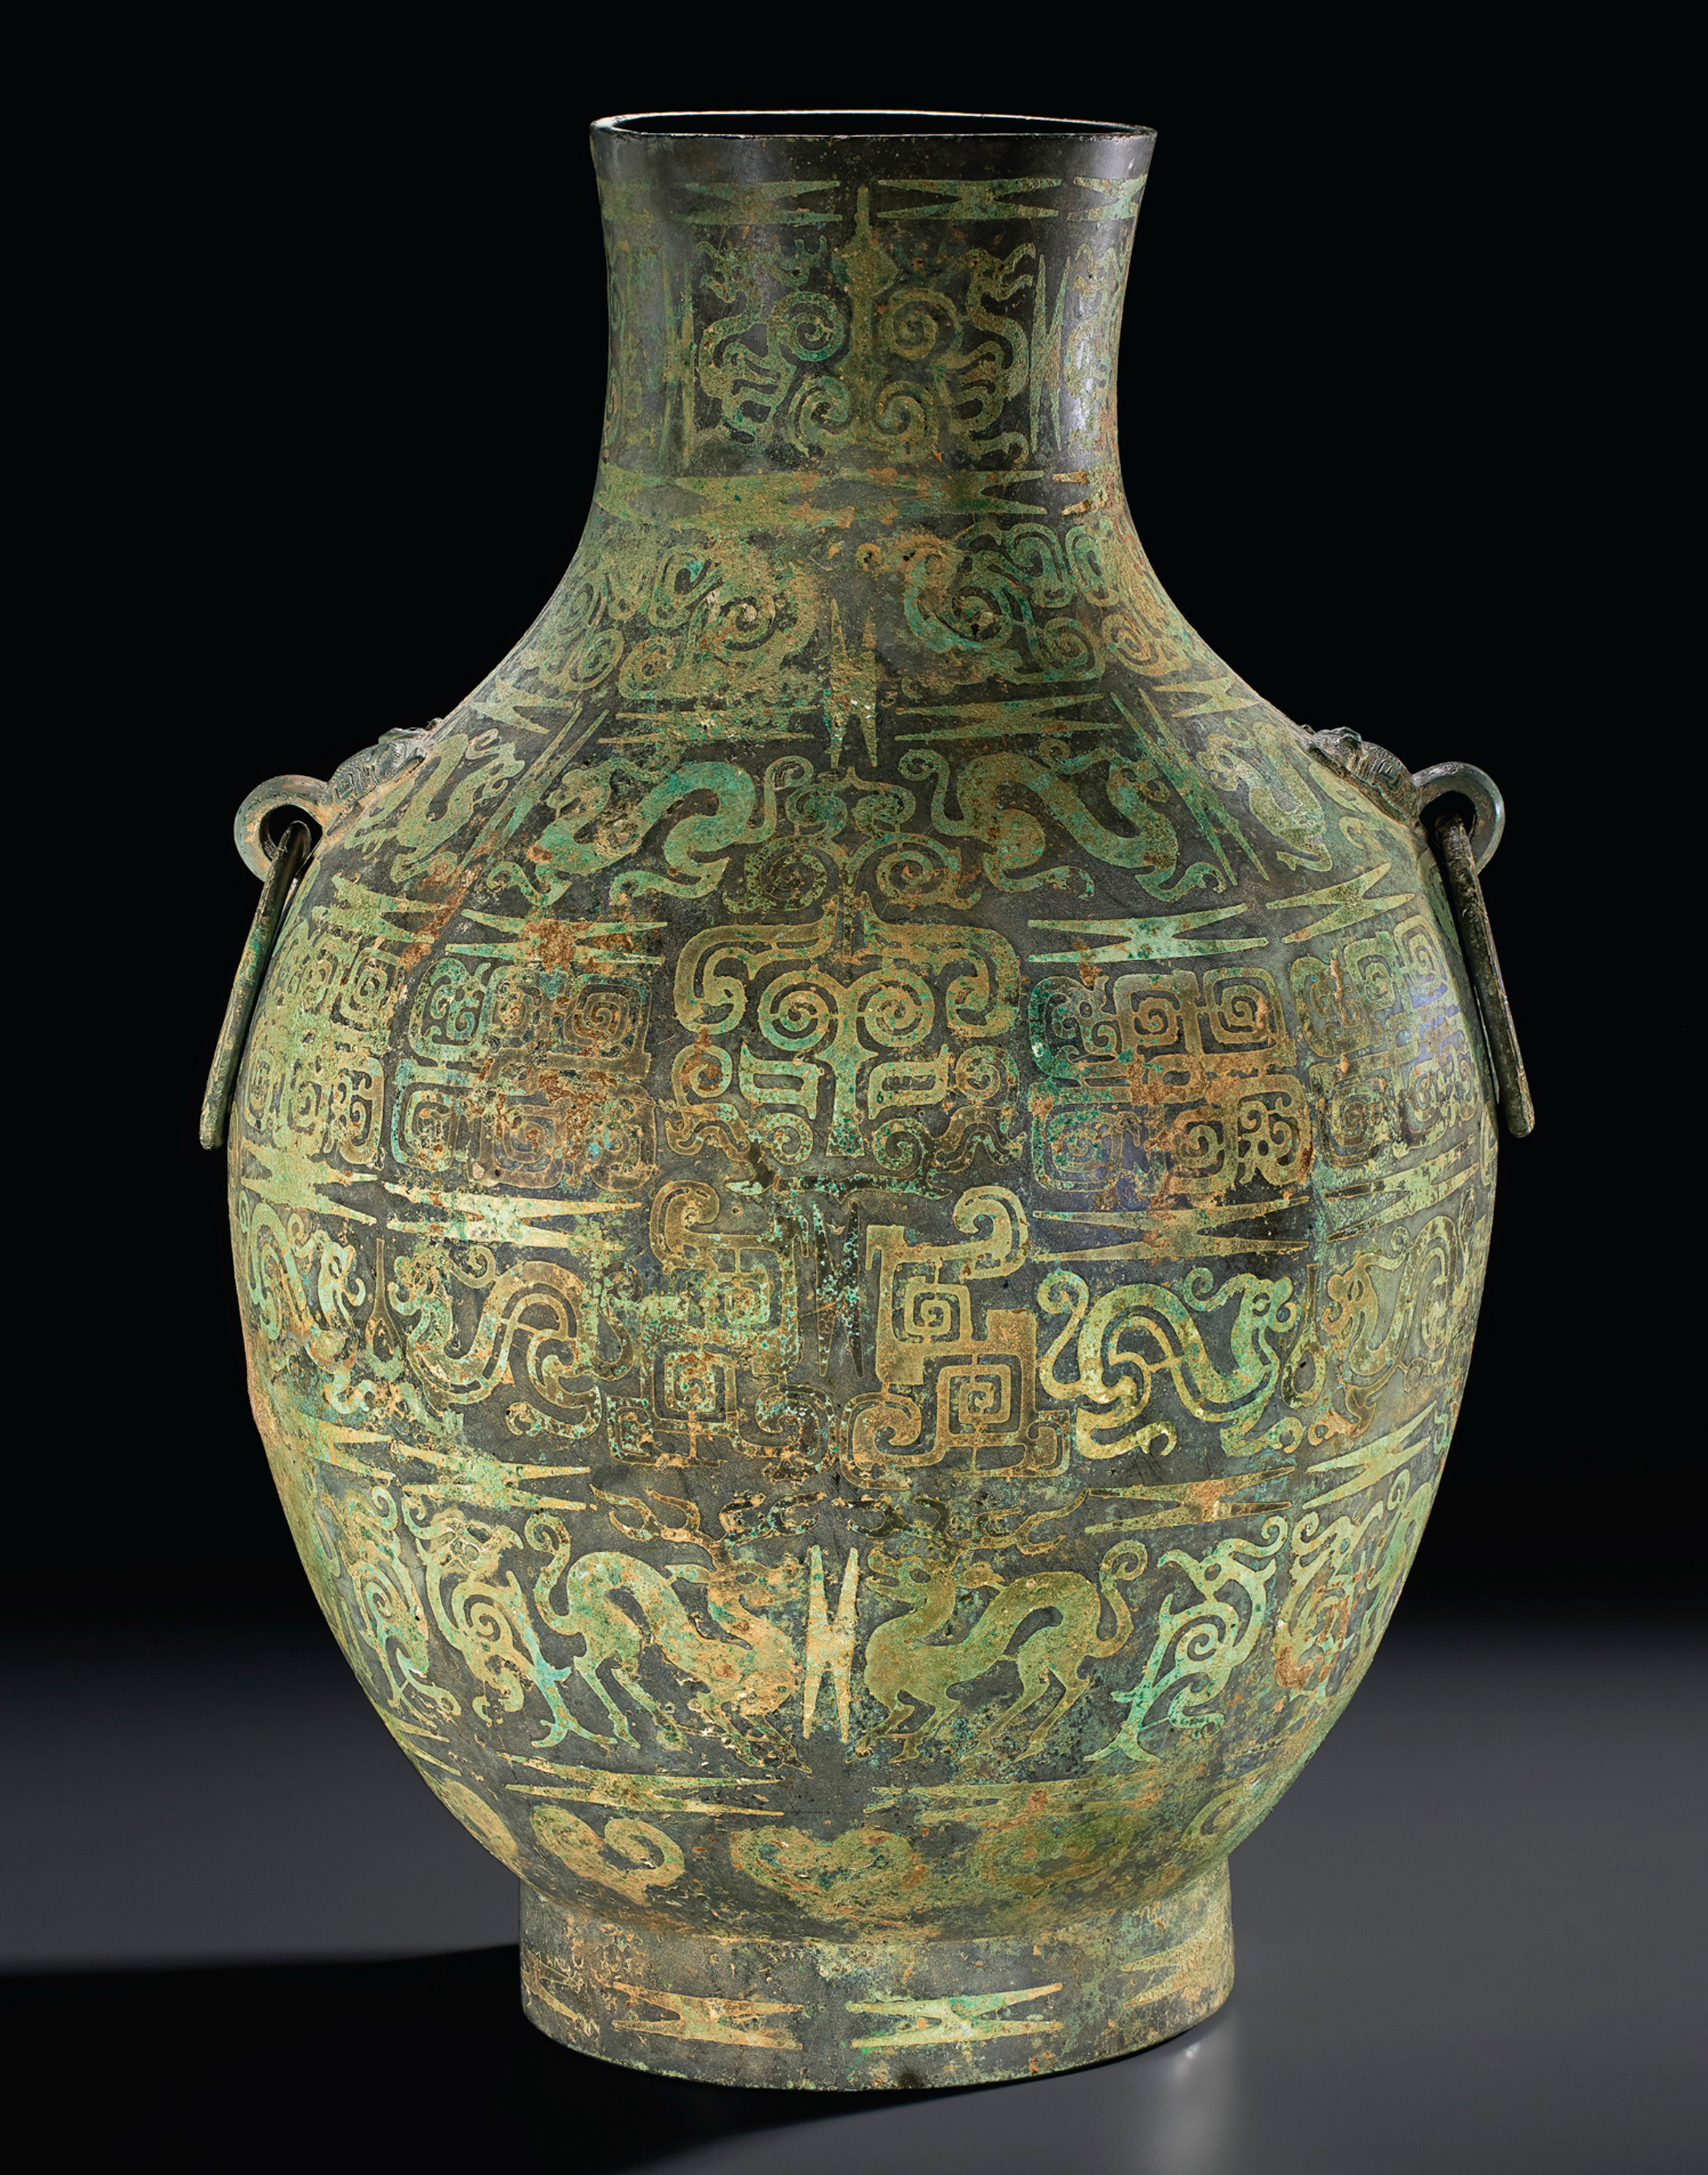 Bronze vessel with copper inlay patterns. China, Warring States, 475-221 BC.jpg